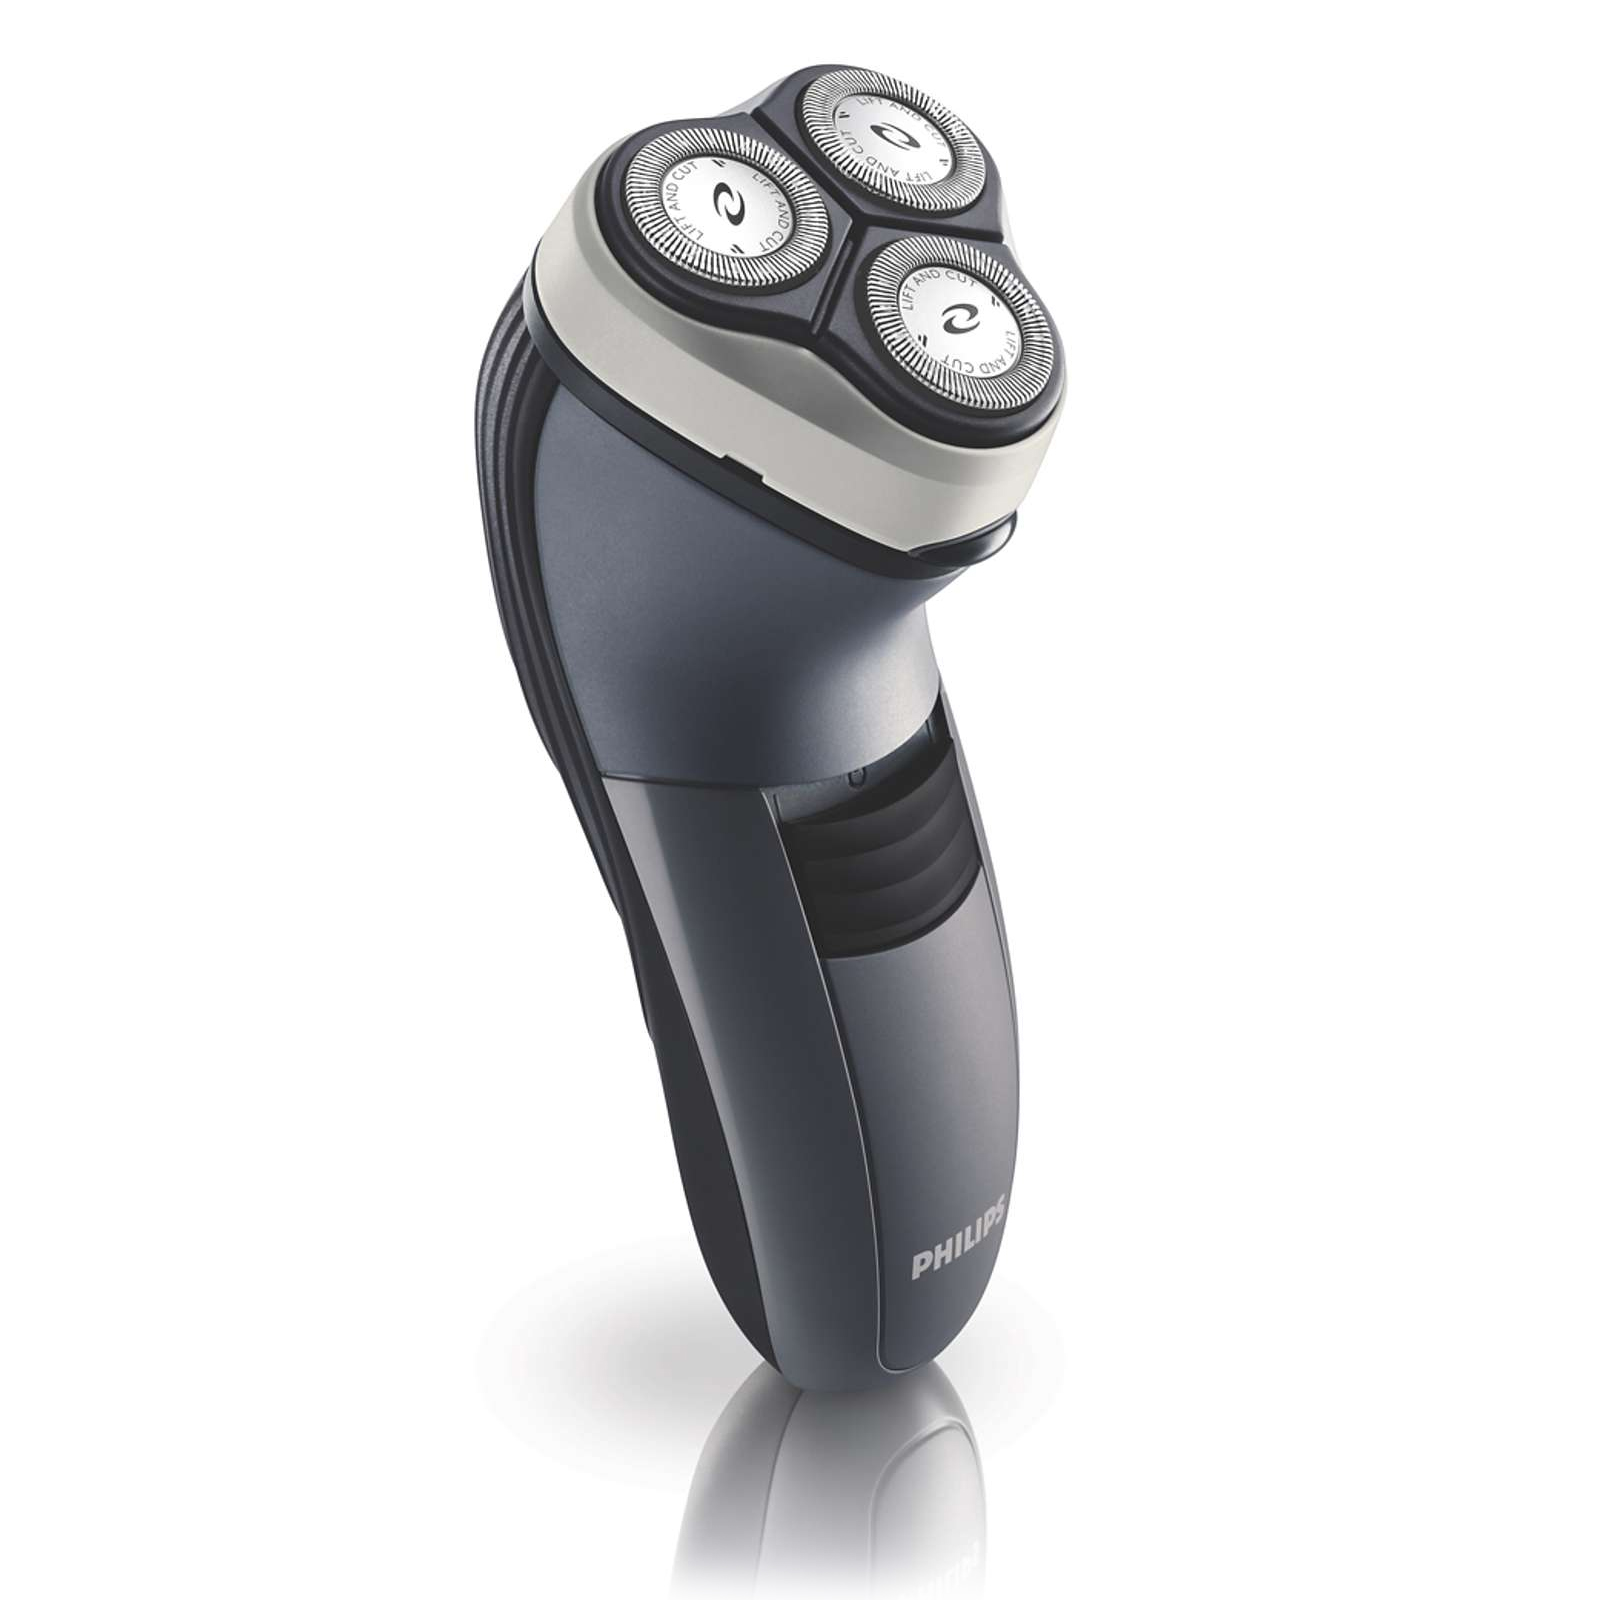 Philips Norelco Electric Shaver 6900 - image 1 of 3